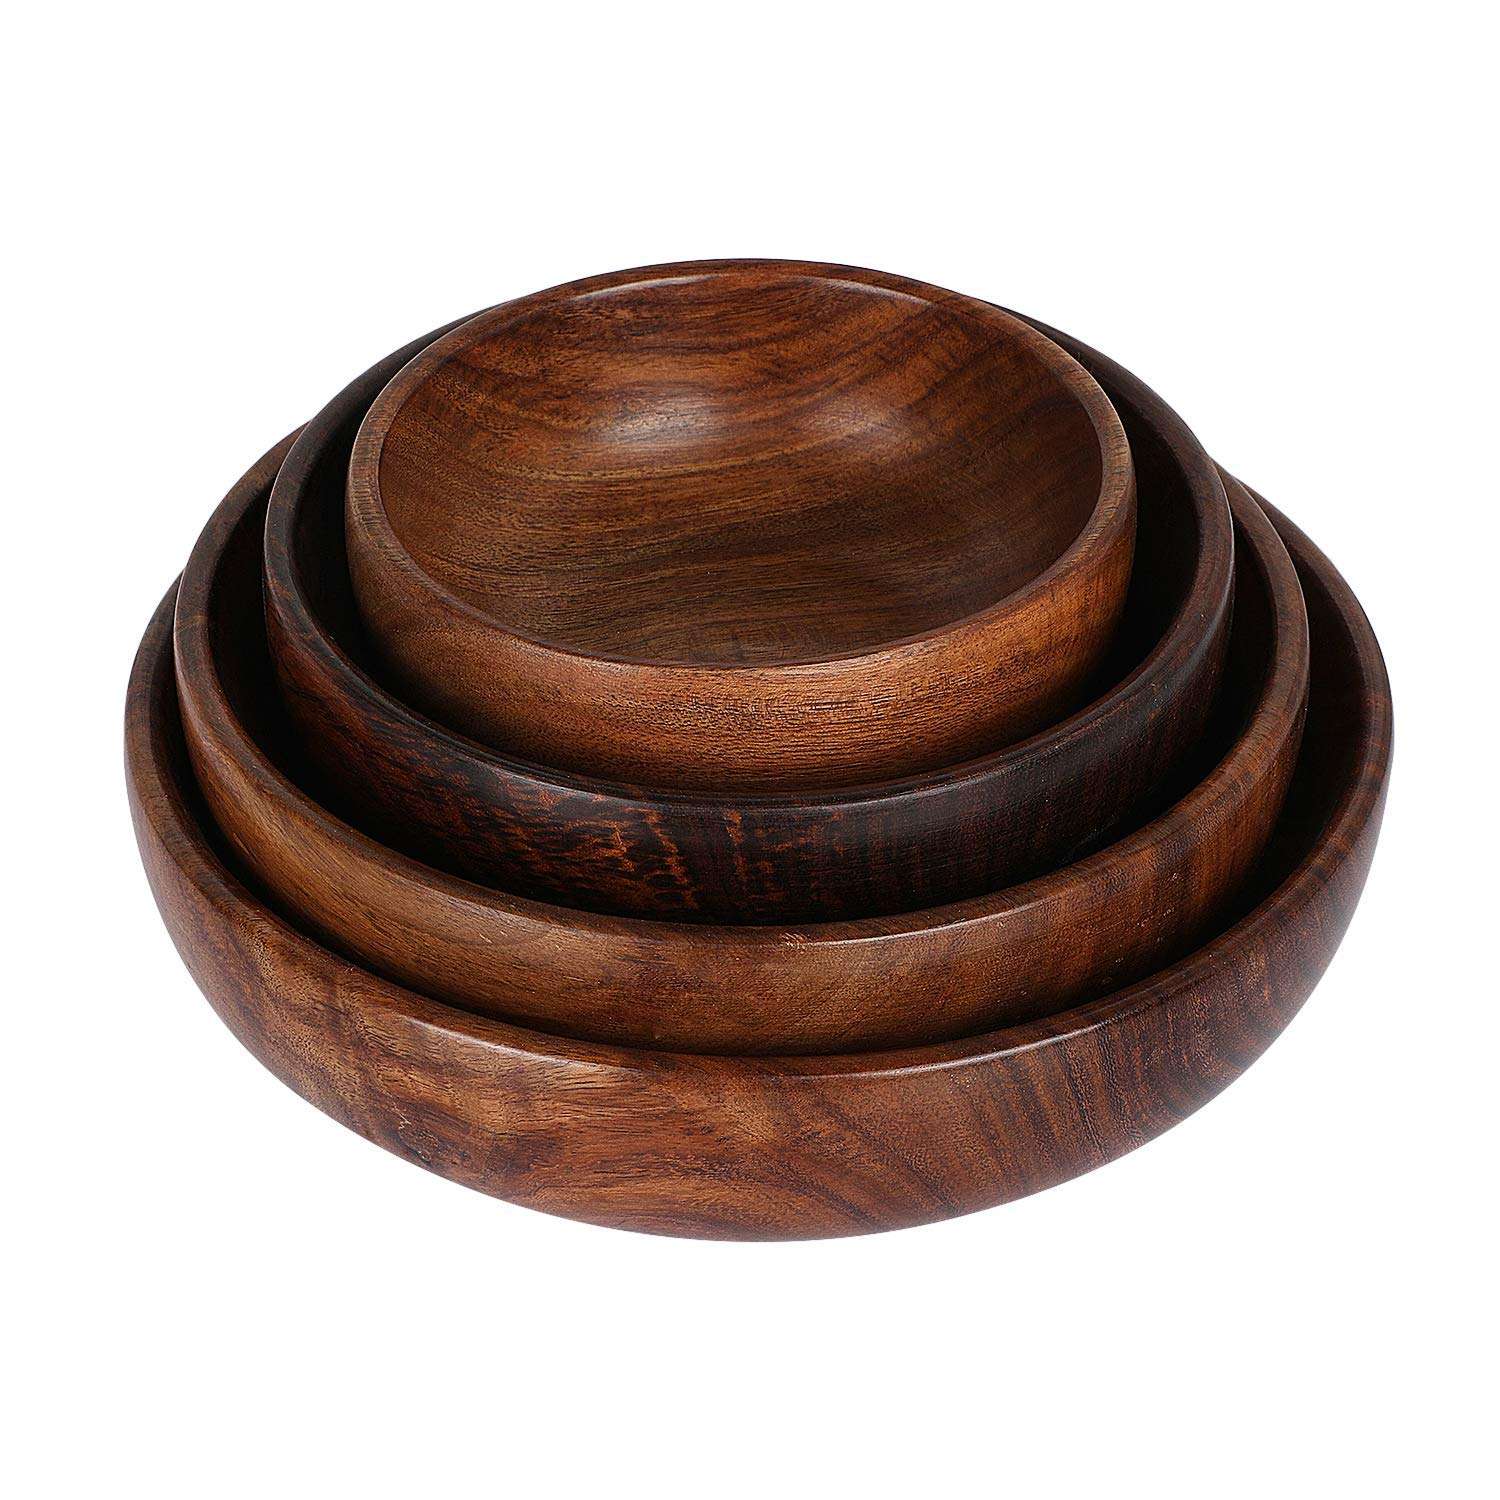 Rosewood Classic Handcrafted Bowl | Wood Bowl Set | Wooden Kitchenware items